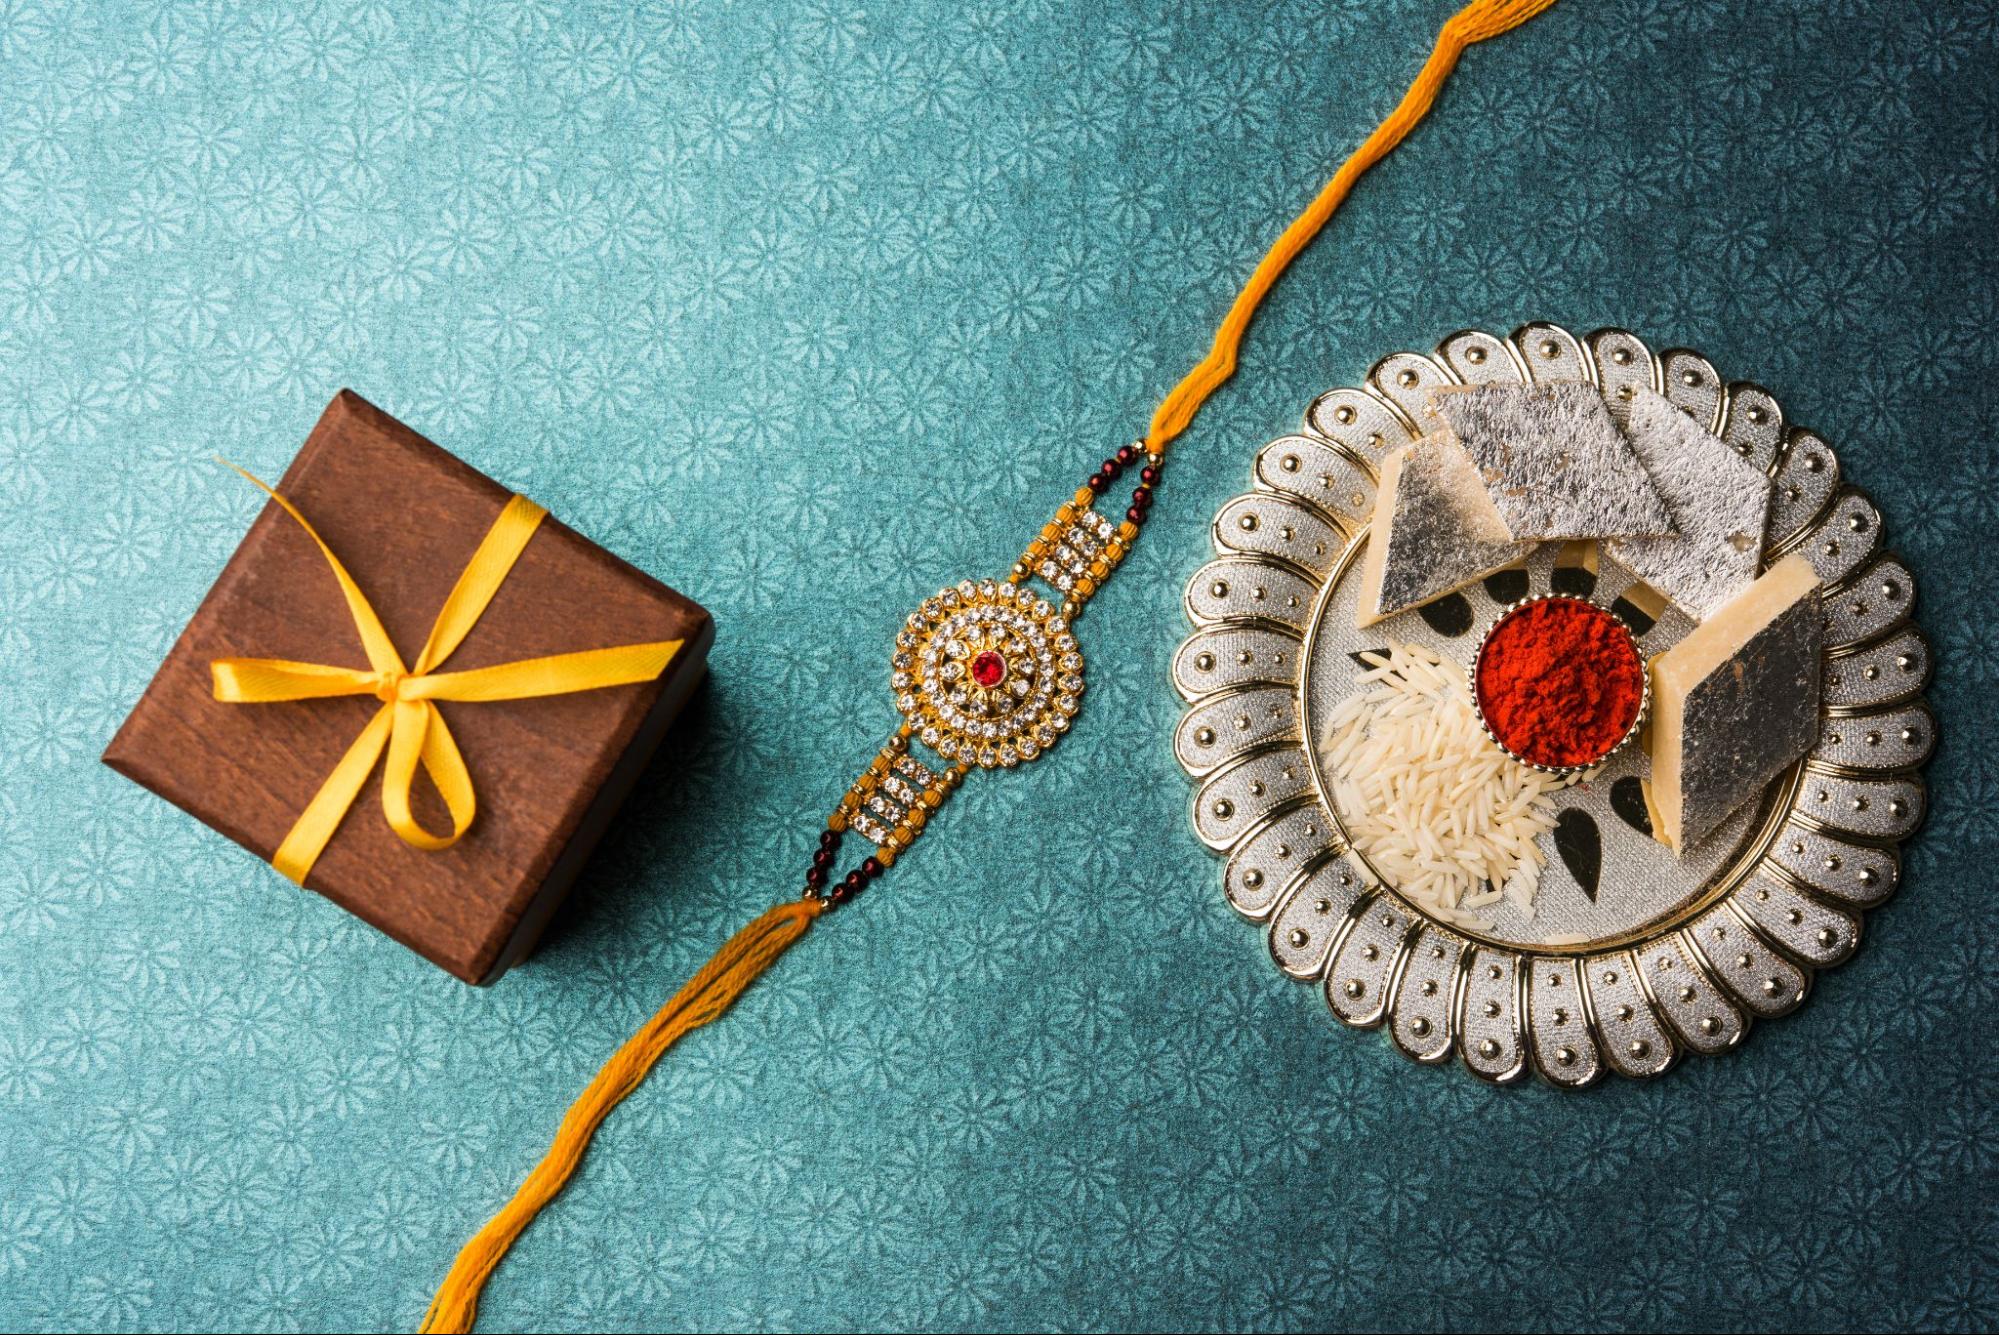 DIY Rakhi Designs: Add A Personalized Touch To Your Brother's Wrist